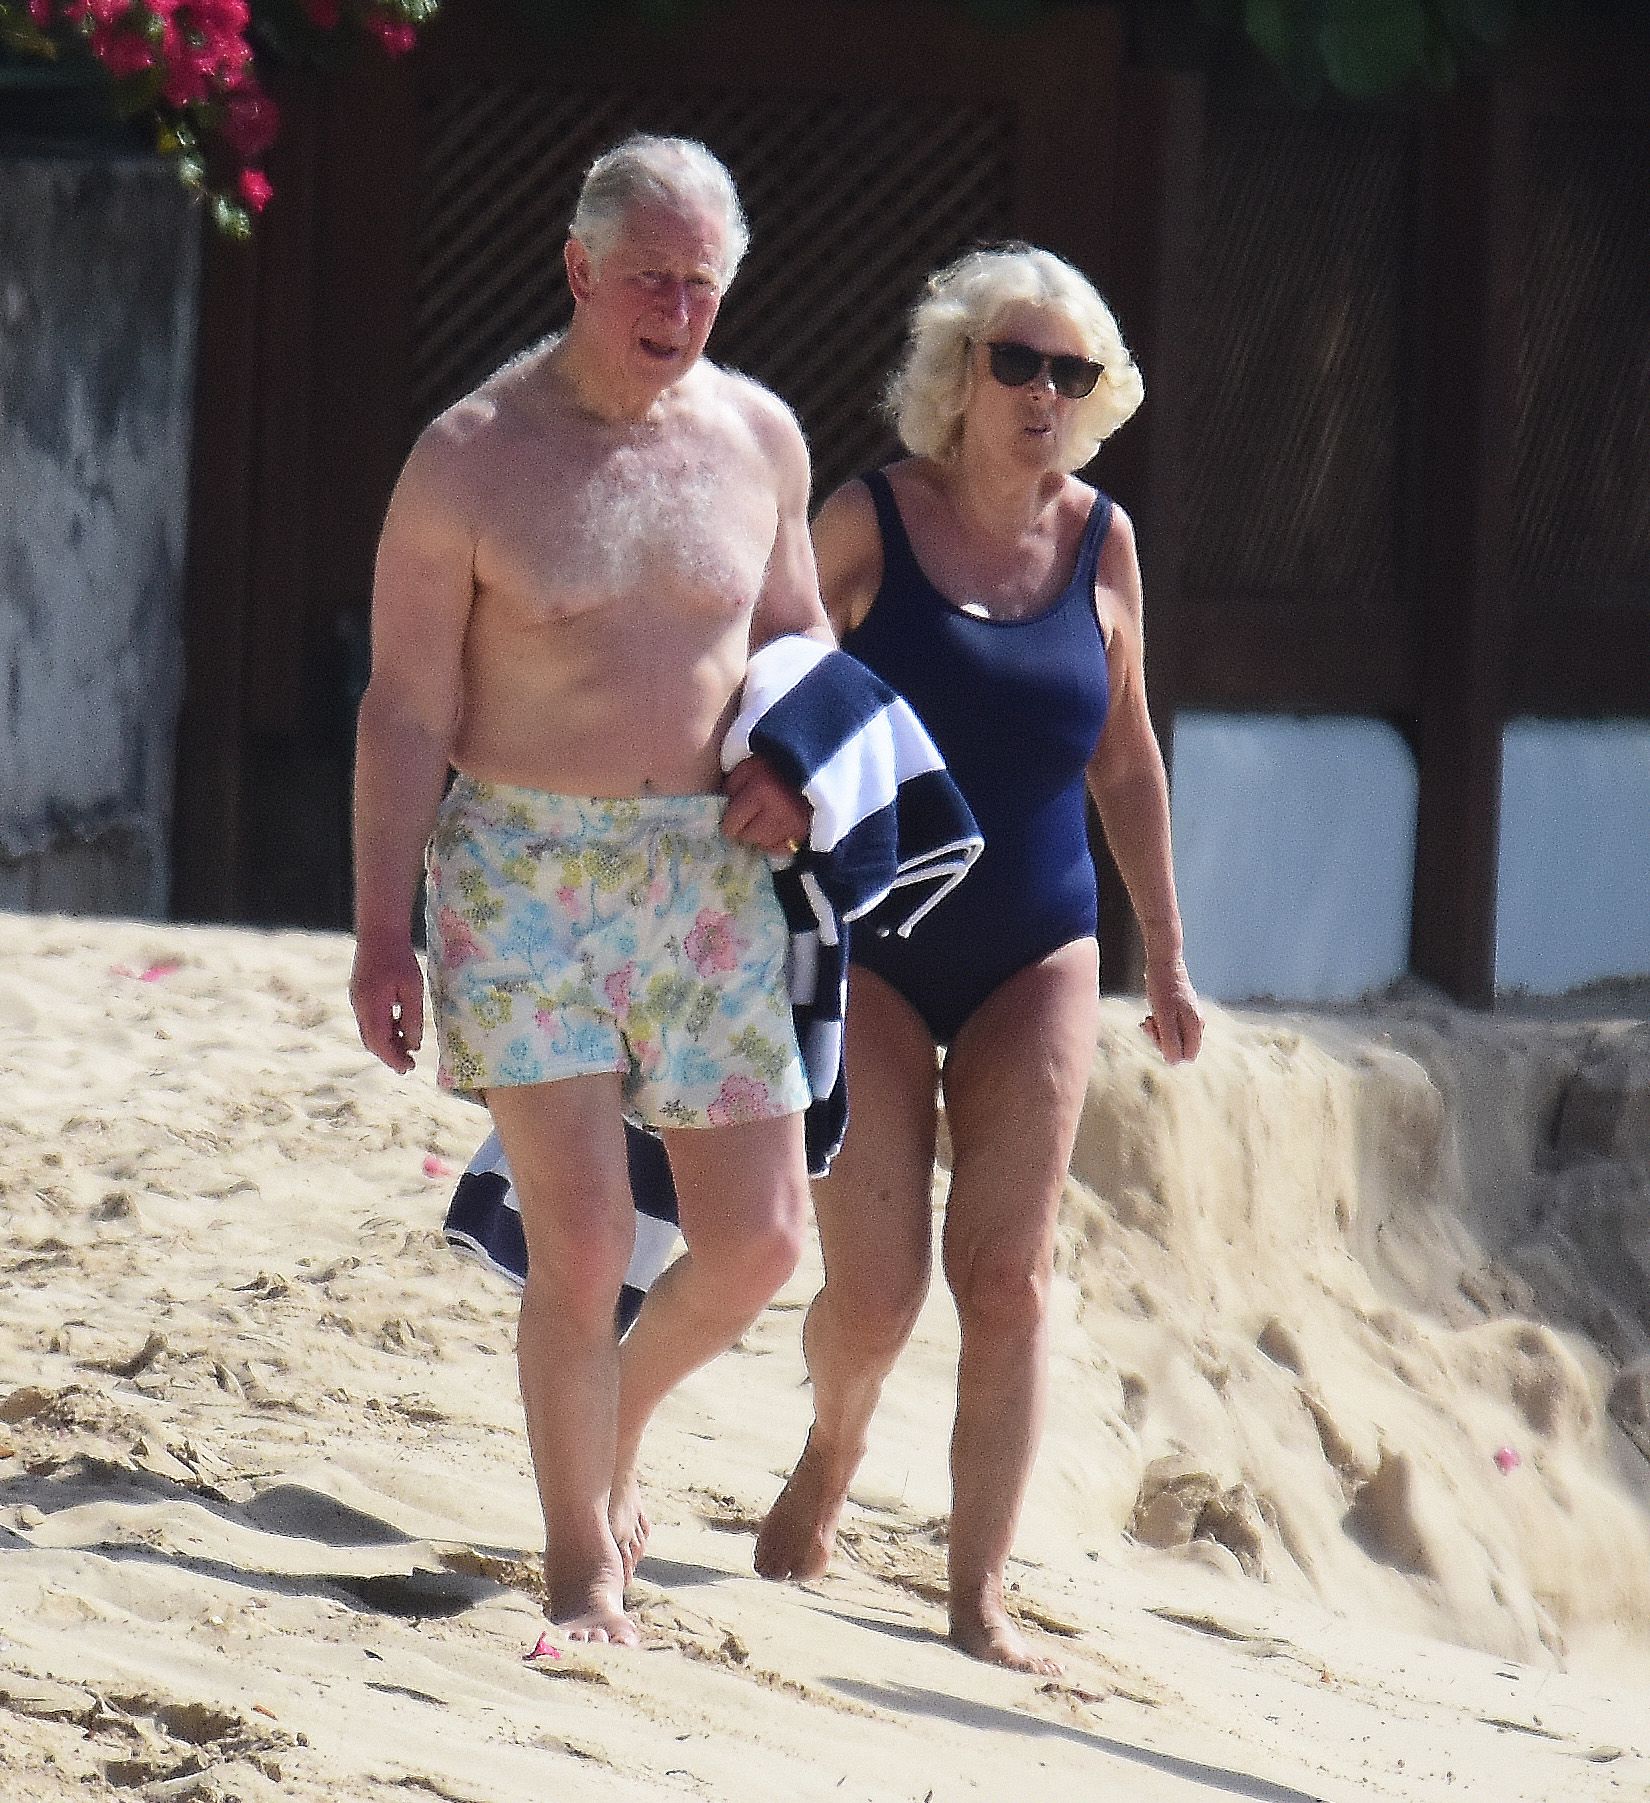 Topless Sleeping Beach - Prince Charles Is Shirtless, Has a Cracking Bod Photos